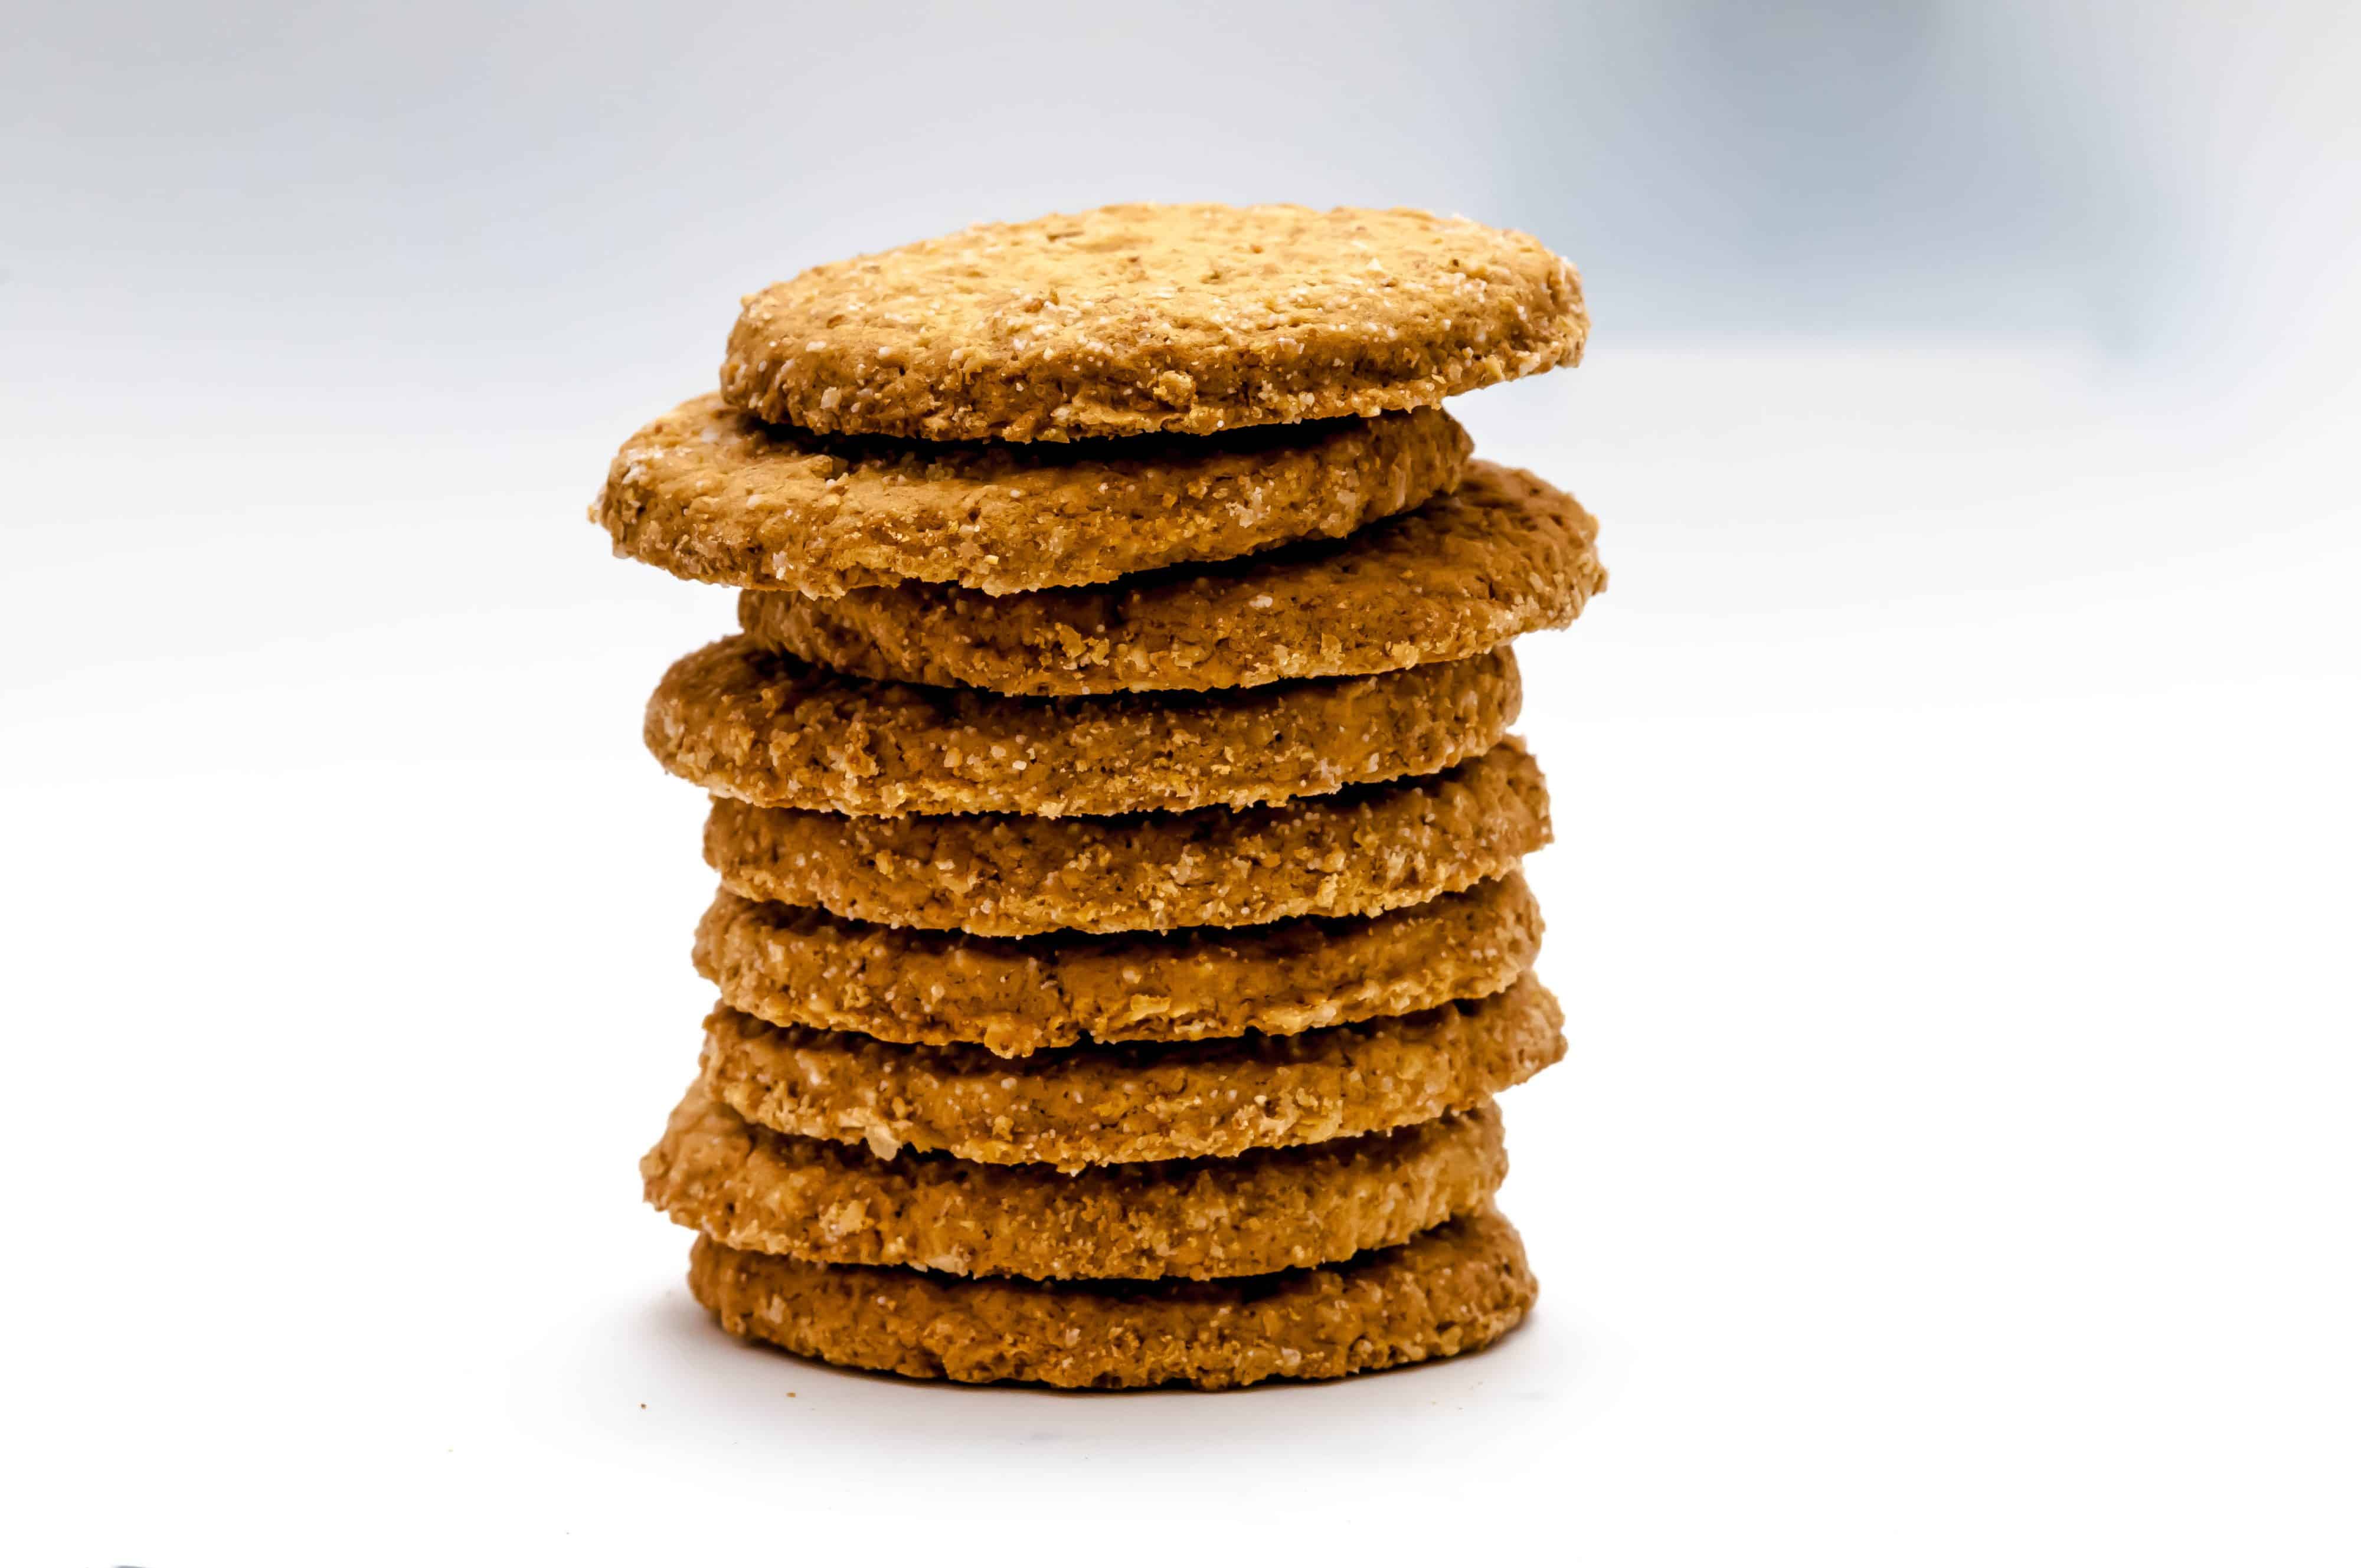 Also biscuits: delicious biscuits. A stack of oatmeal biscuits is symbolic of cookies on the internet.